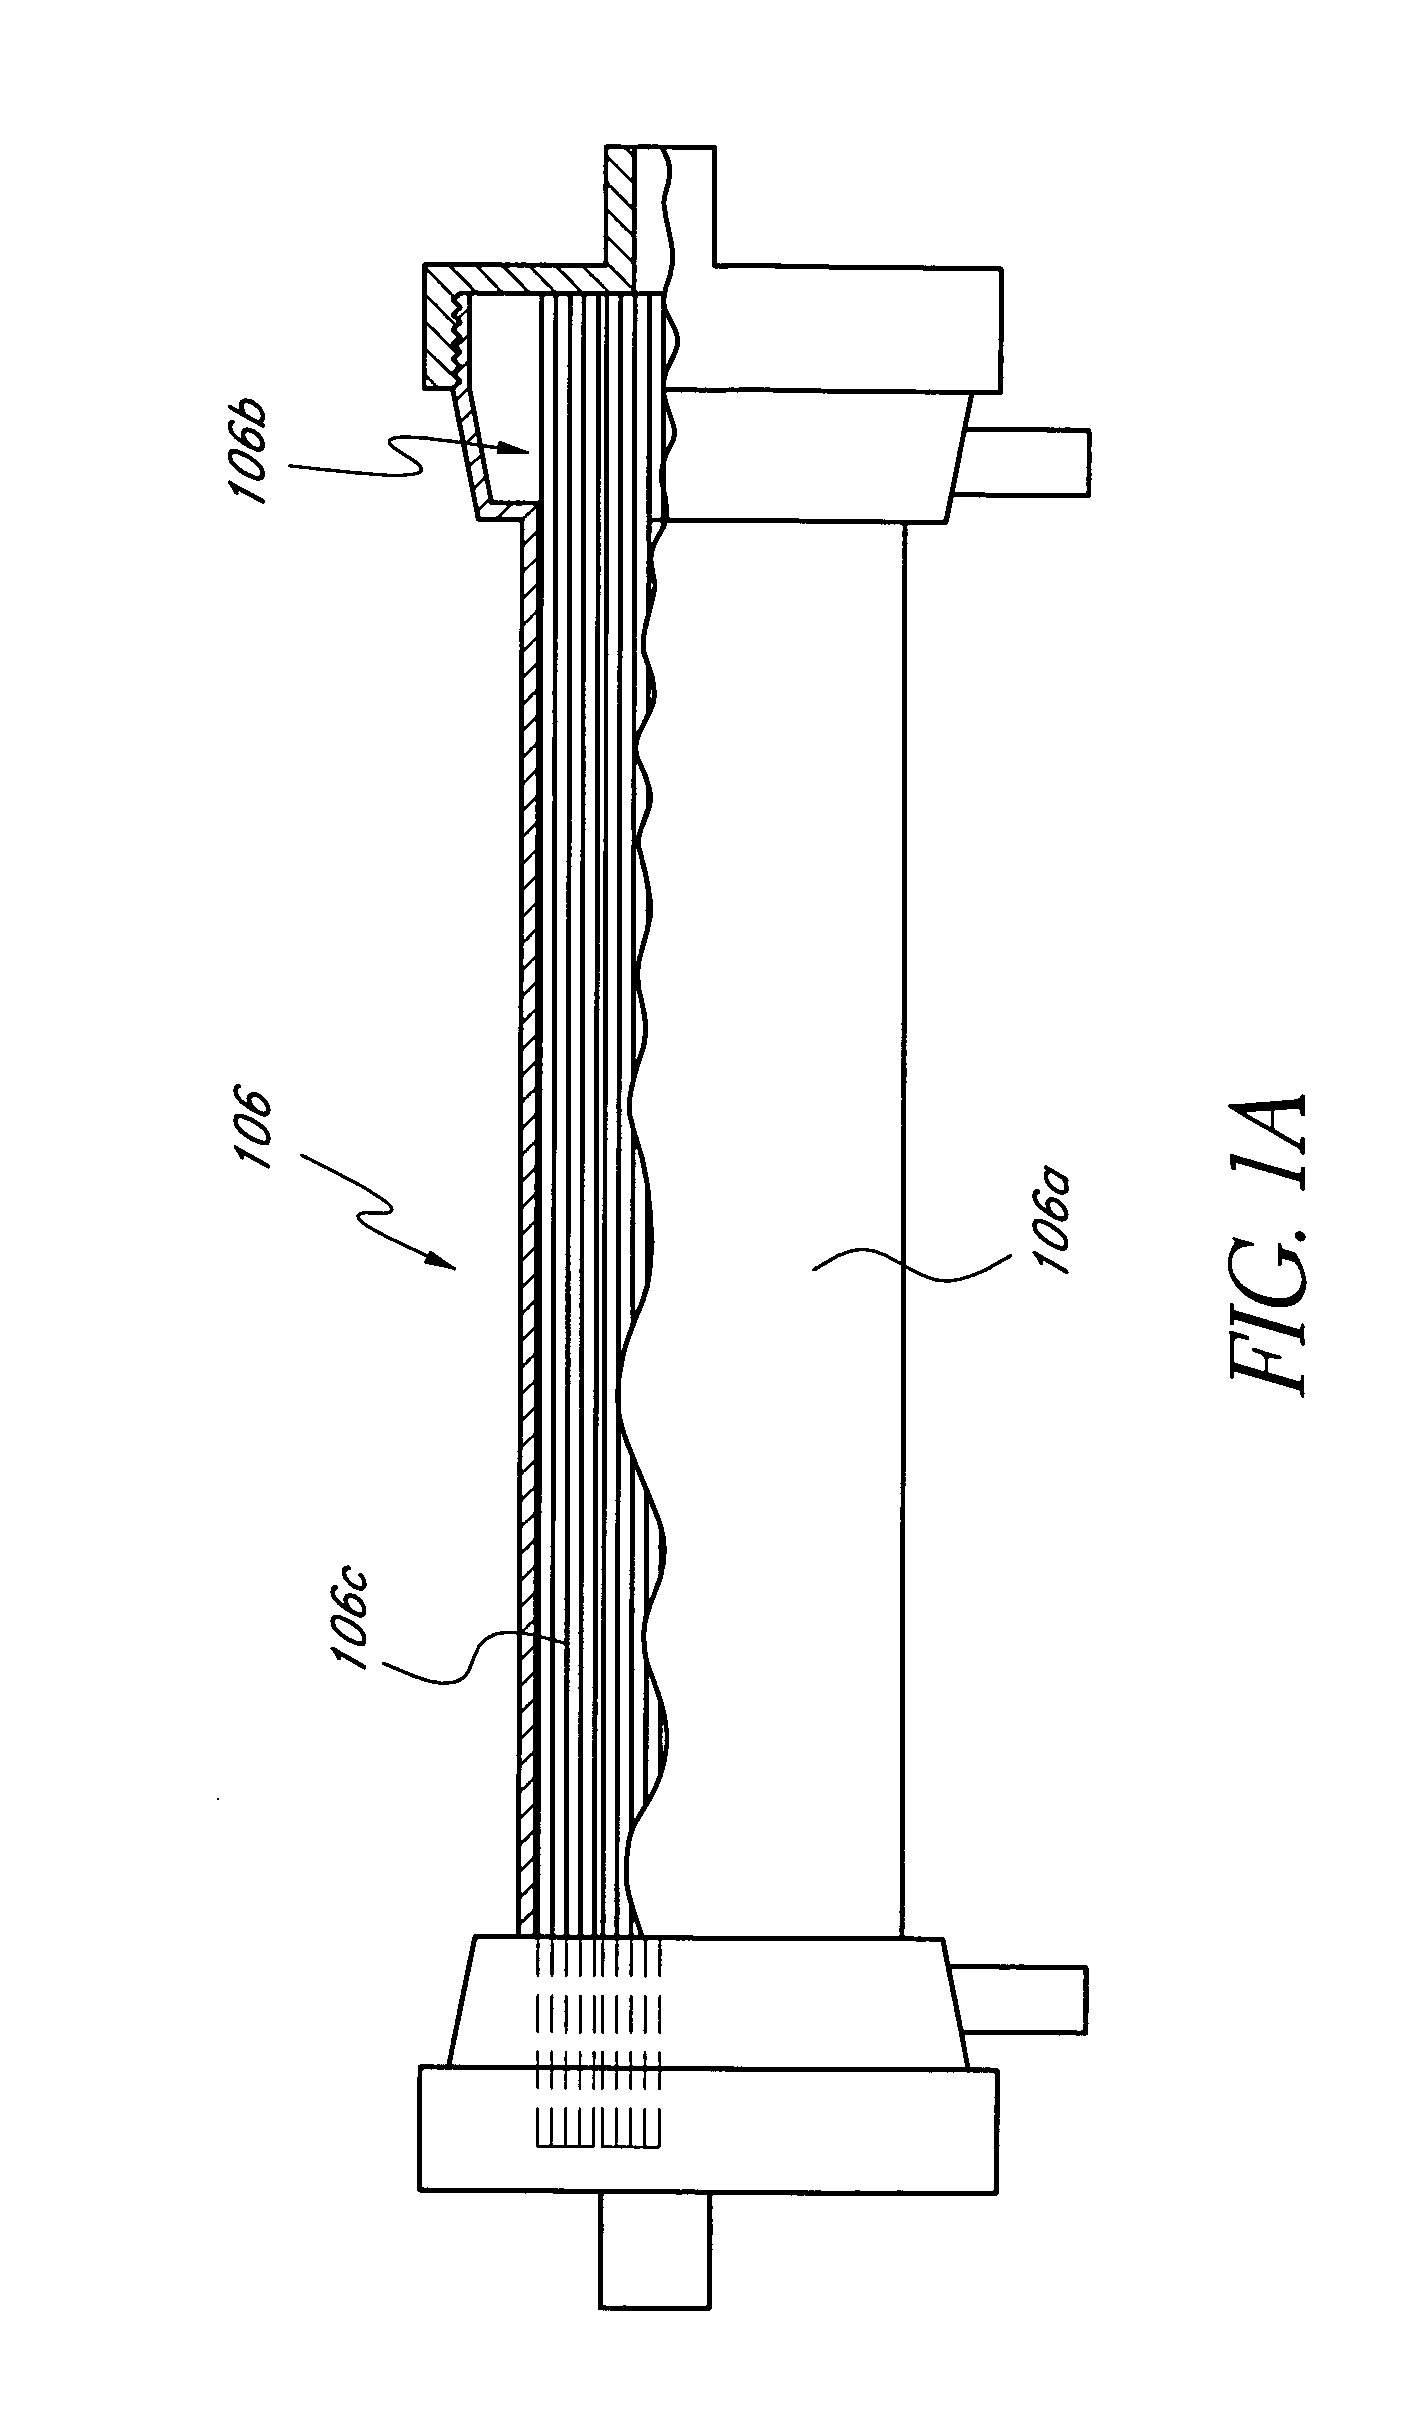 Extracorporeal blood treatment system using ultraviolet light and filters